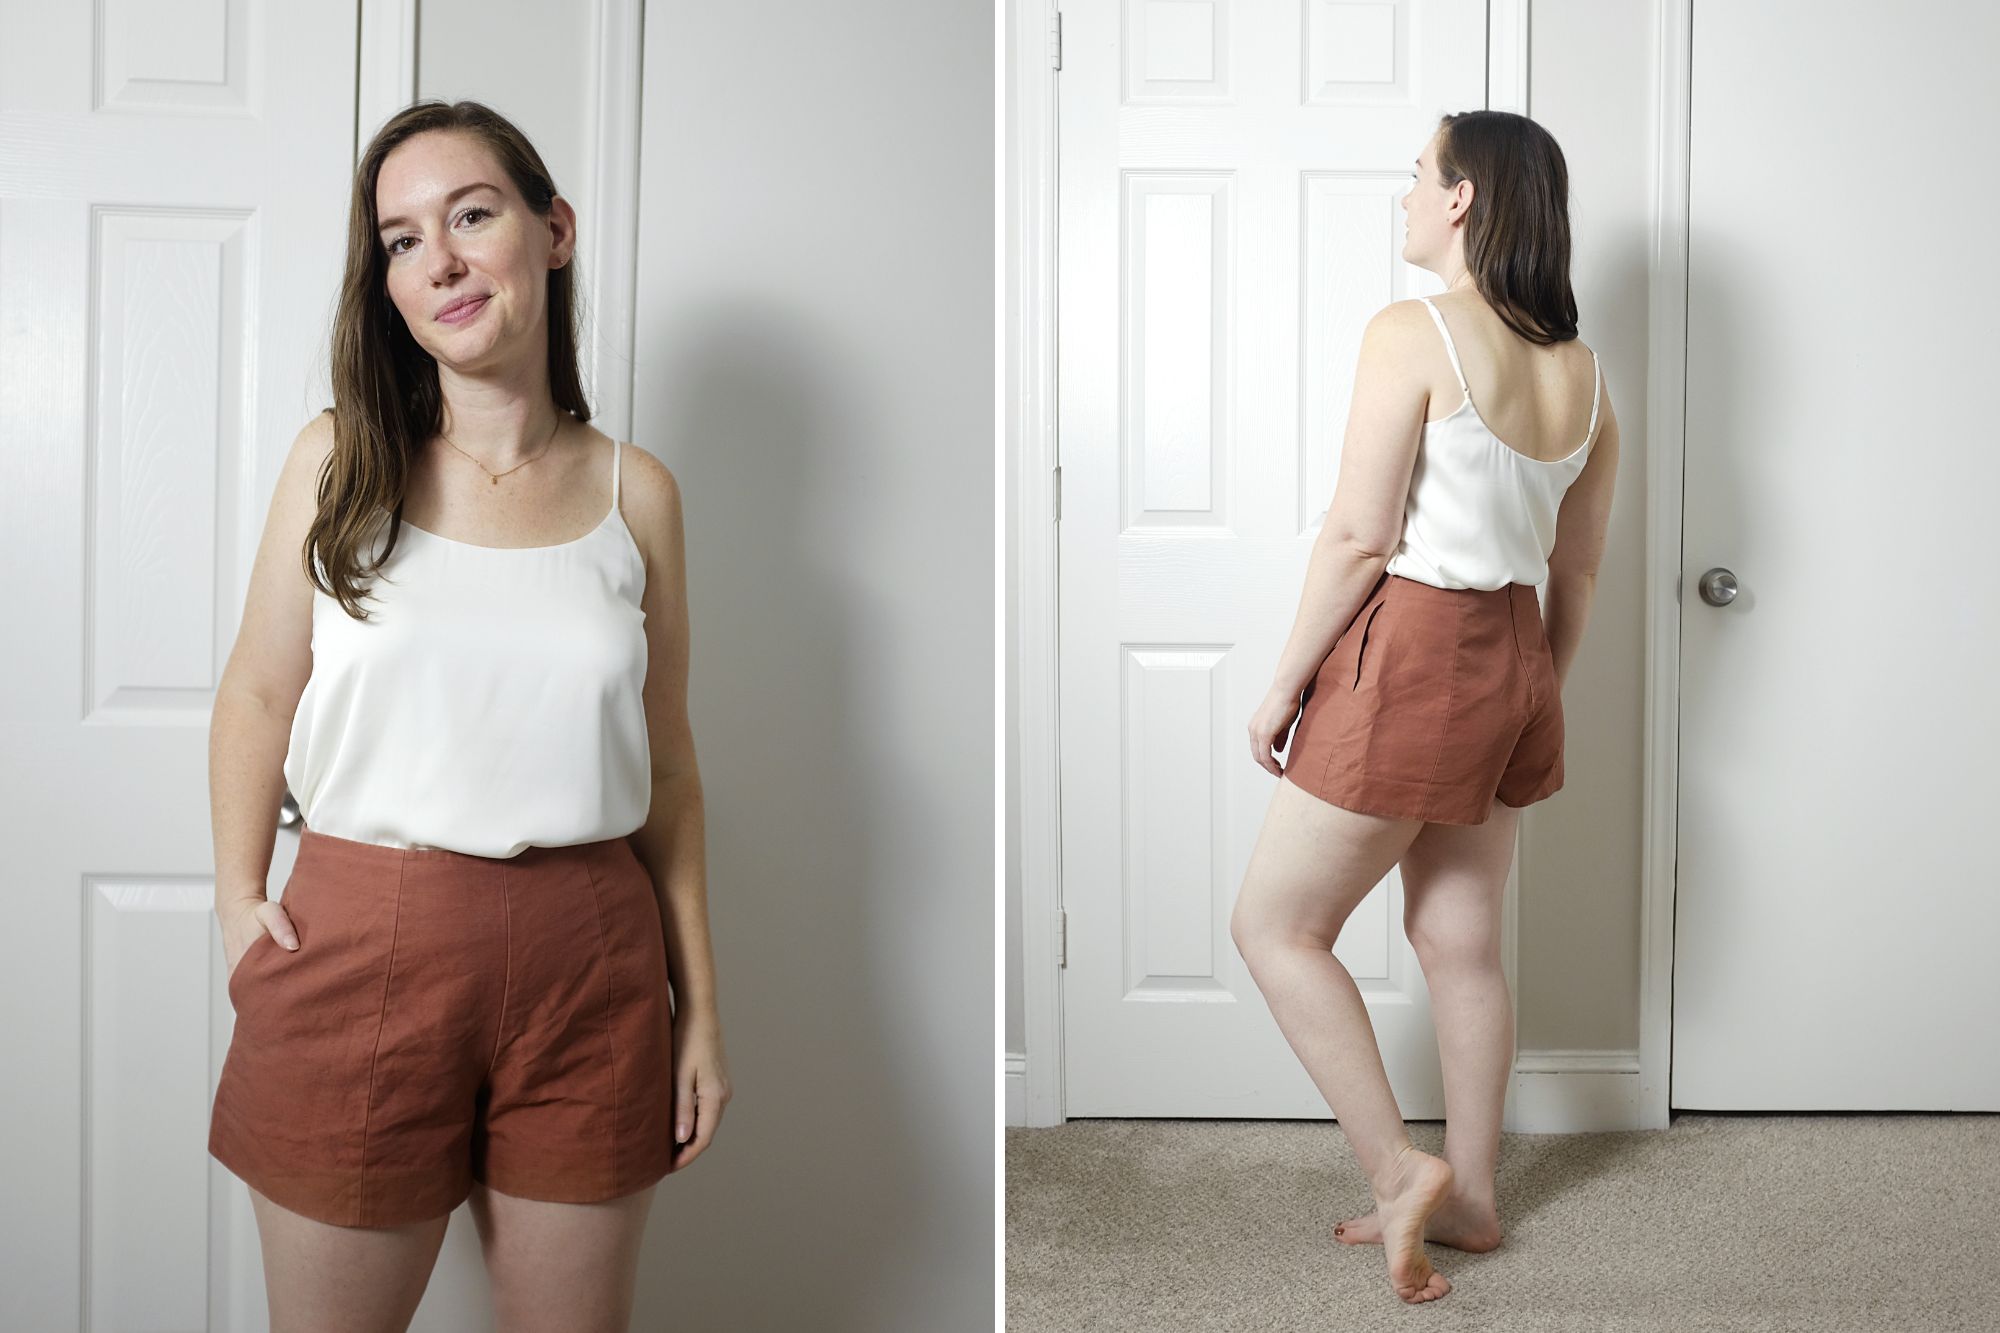 Alyssa wears the Washable Stretch Silk Cami from Quince tucked into a pair of shorts in two poses